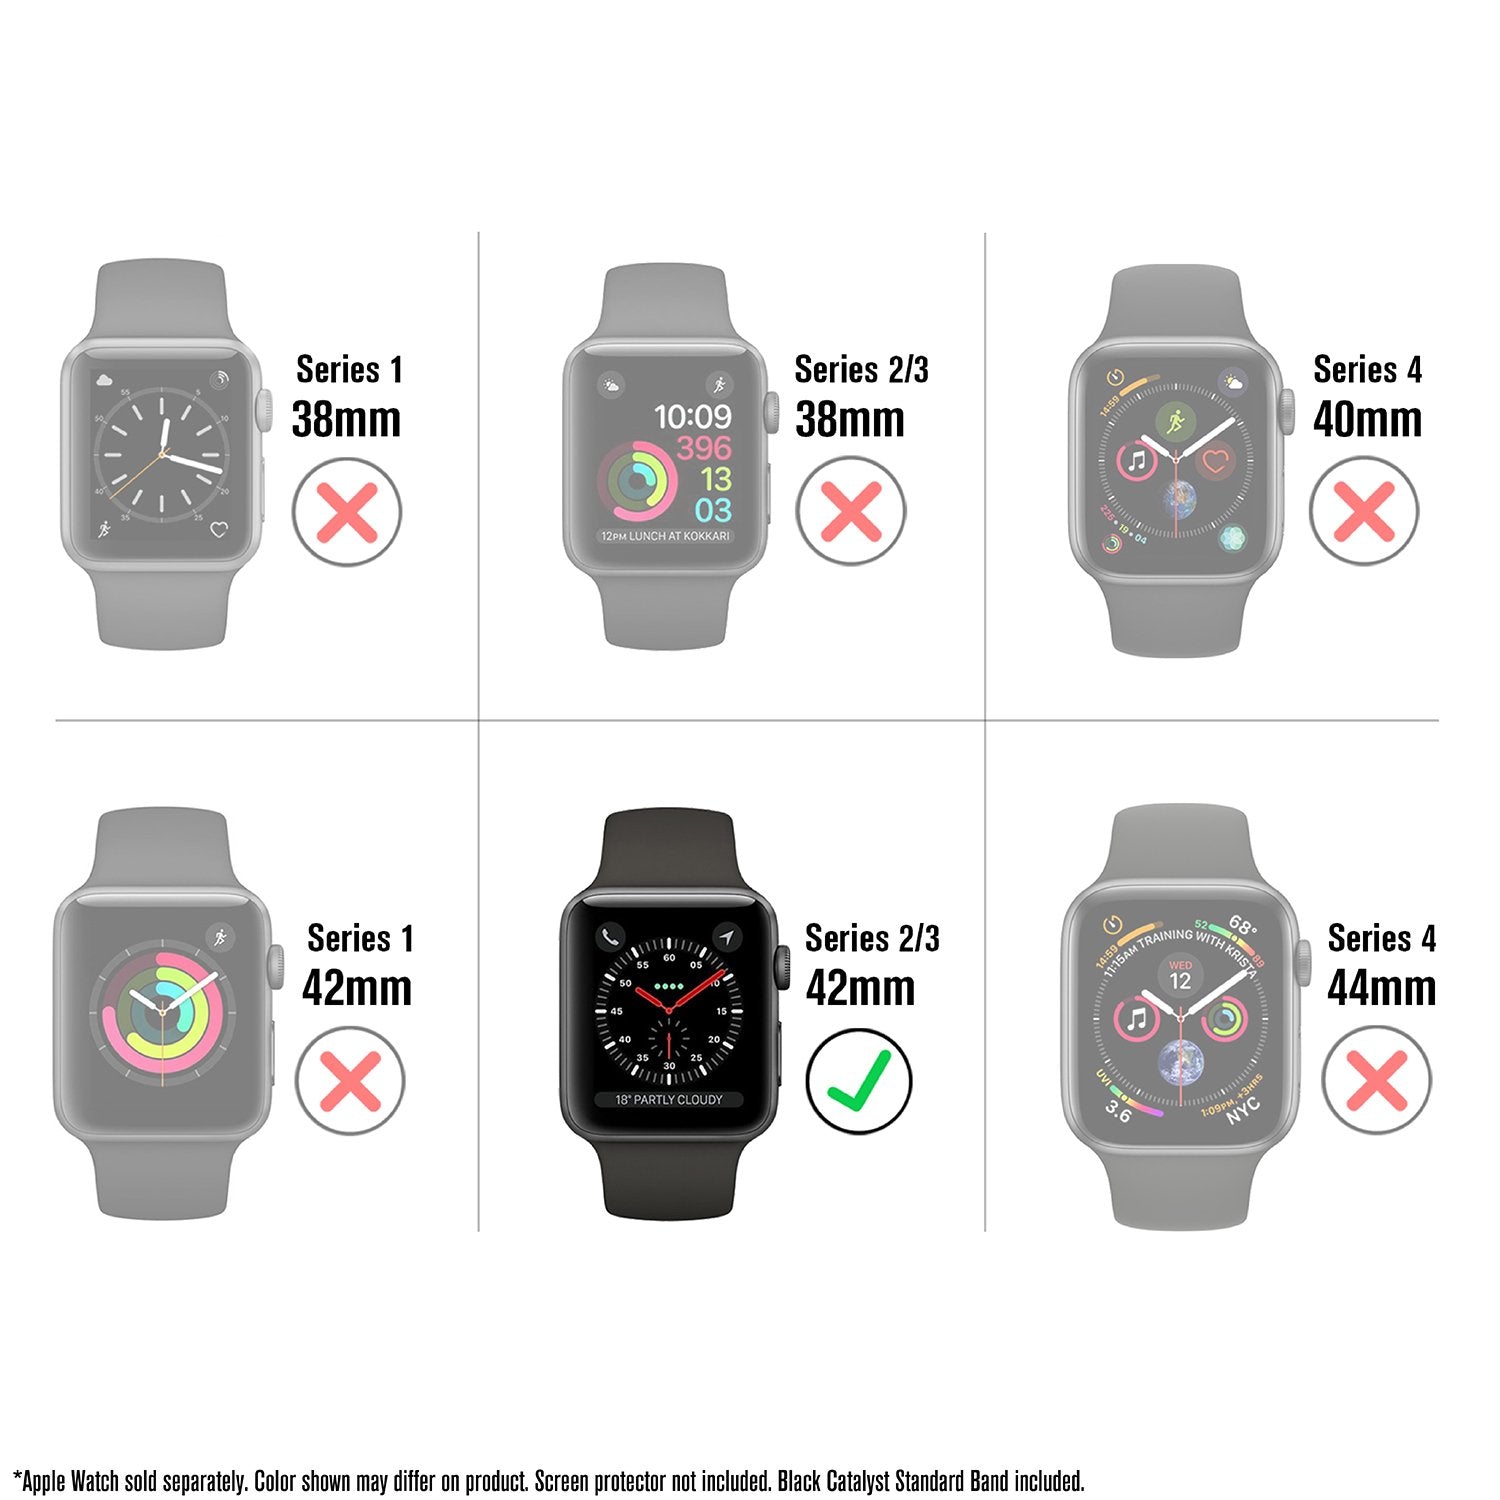 catalyst apple watch series 3 42mm waterproof case band showing different sizes of apple watch text reads series 1 38mm series 2/3 38mm series 4 40mm series 1 42mm series 2/3 42mm series 4 44mm